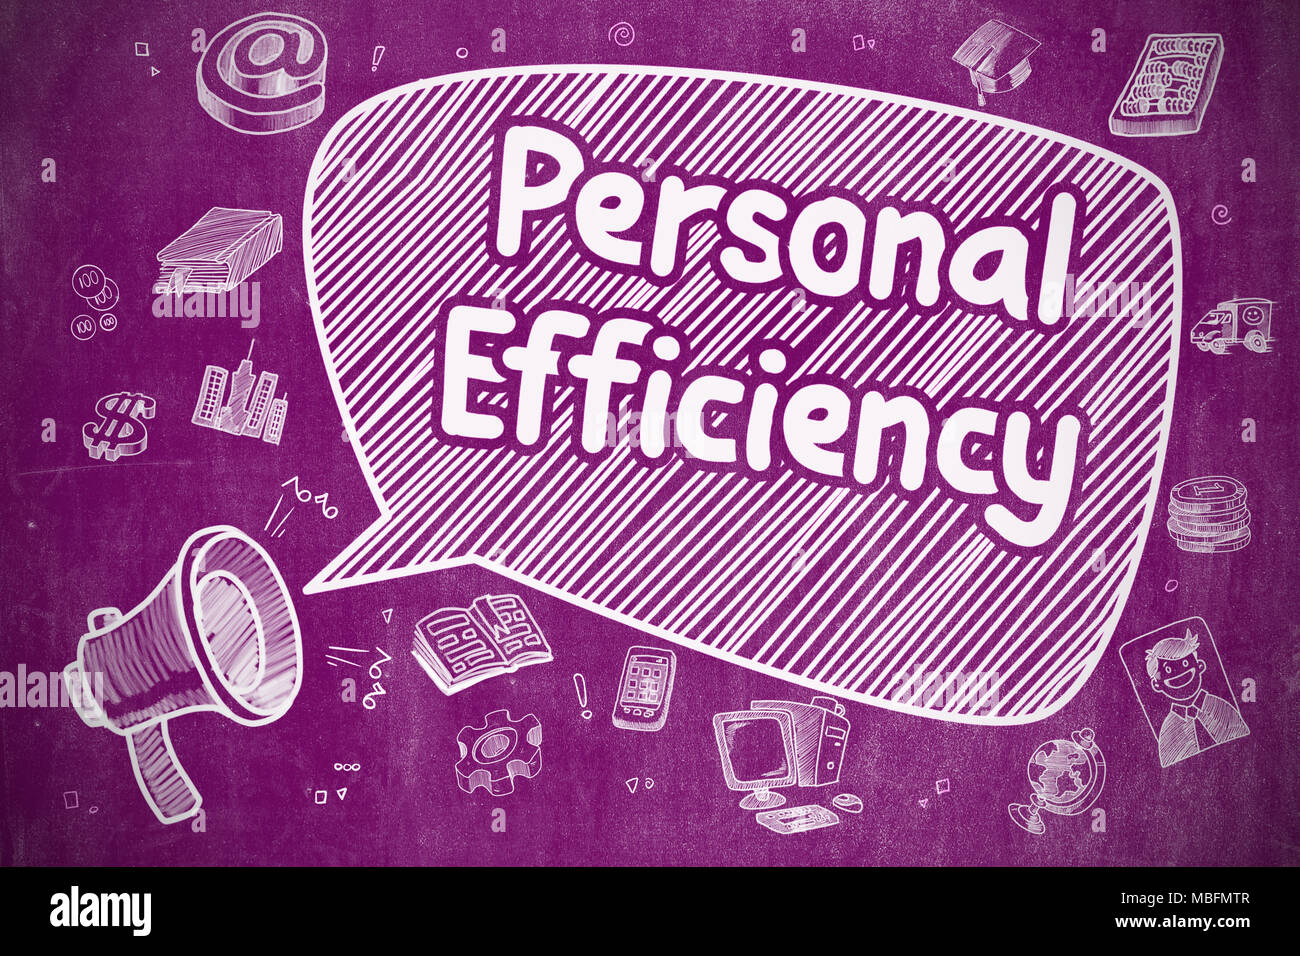 Personal Efficiency - Business Concept. Stock Photo